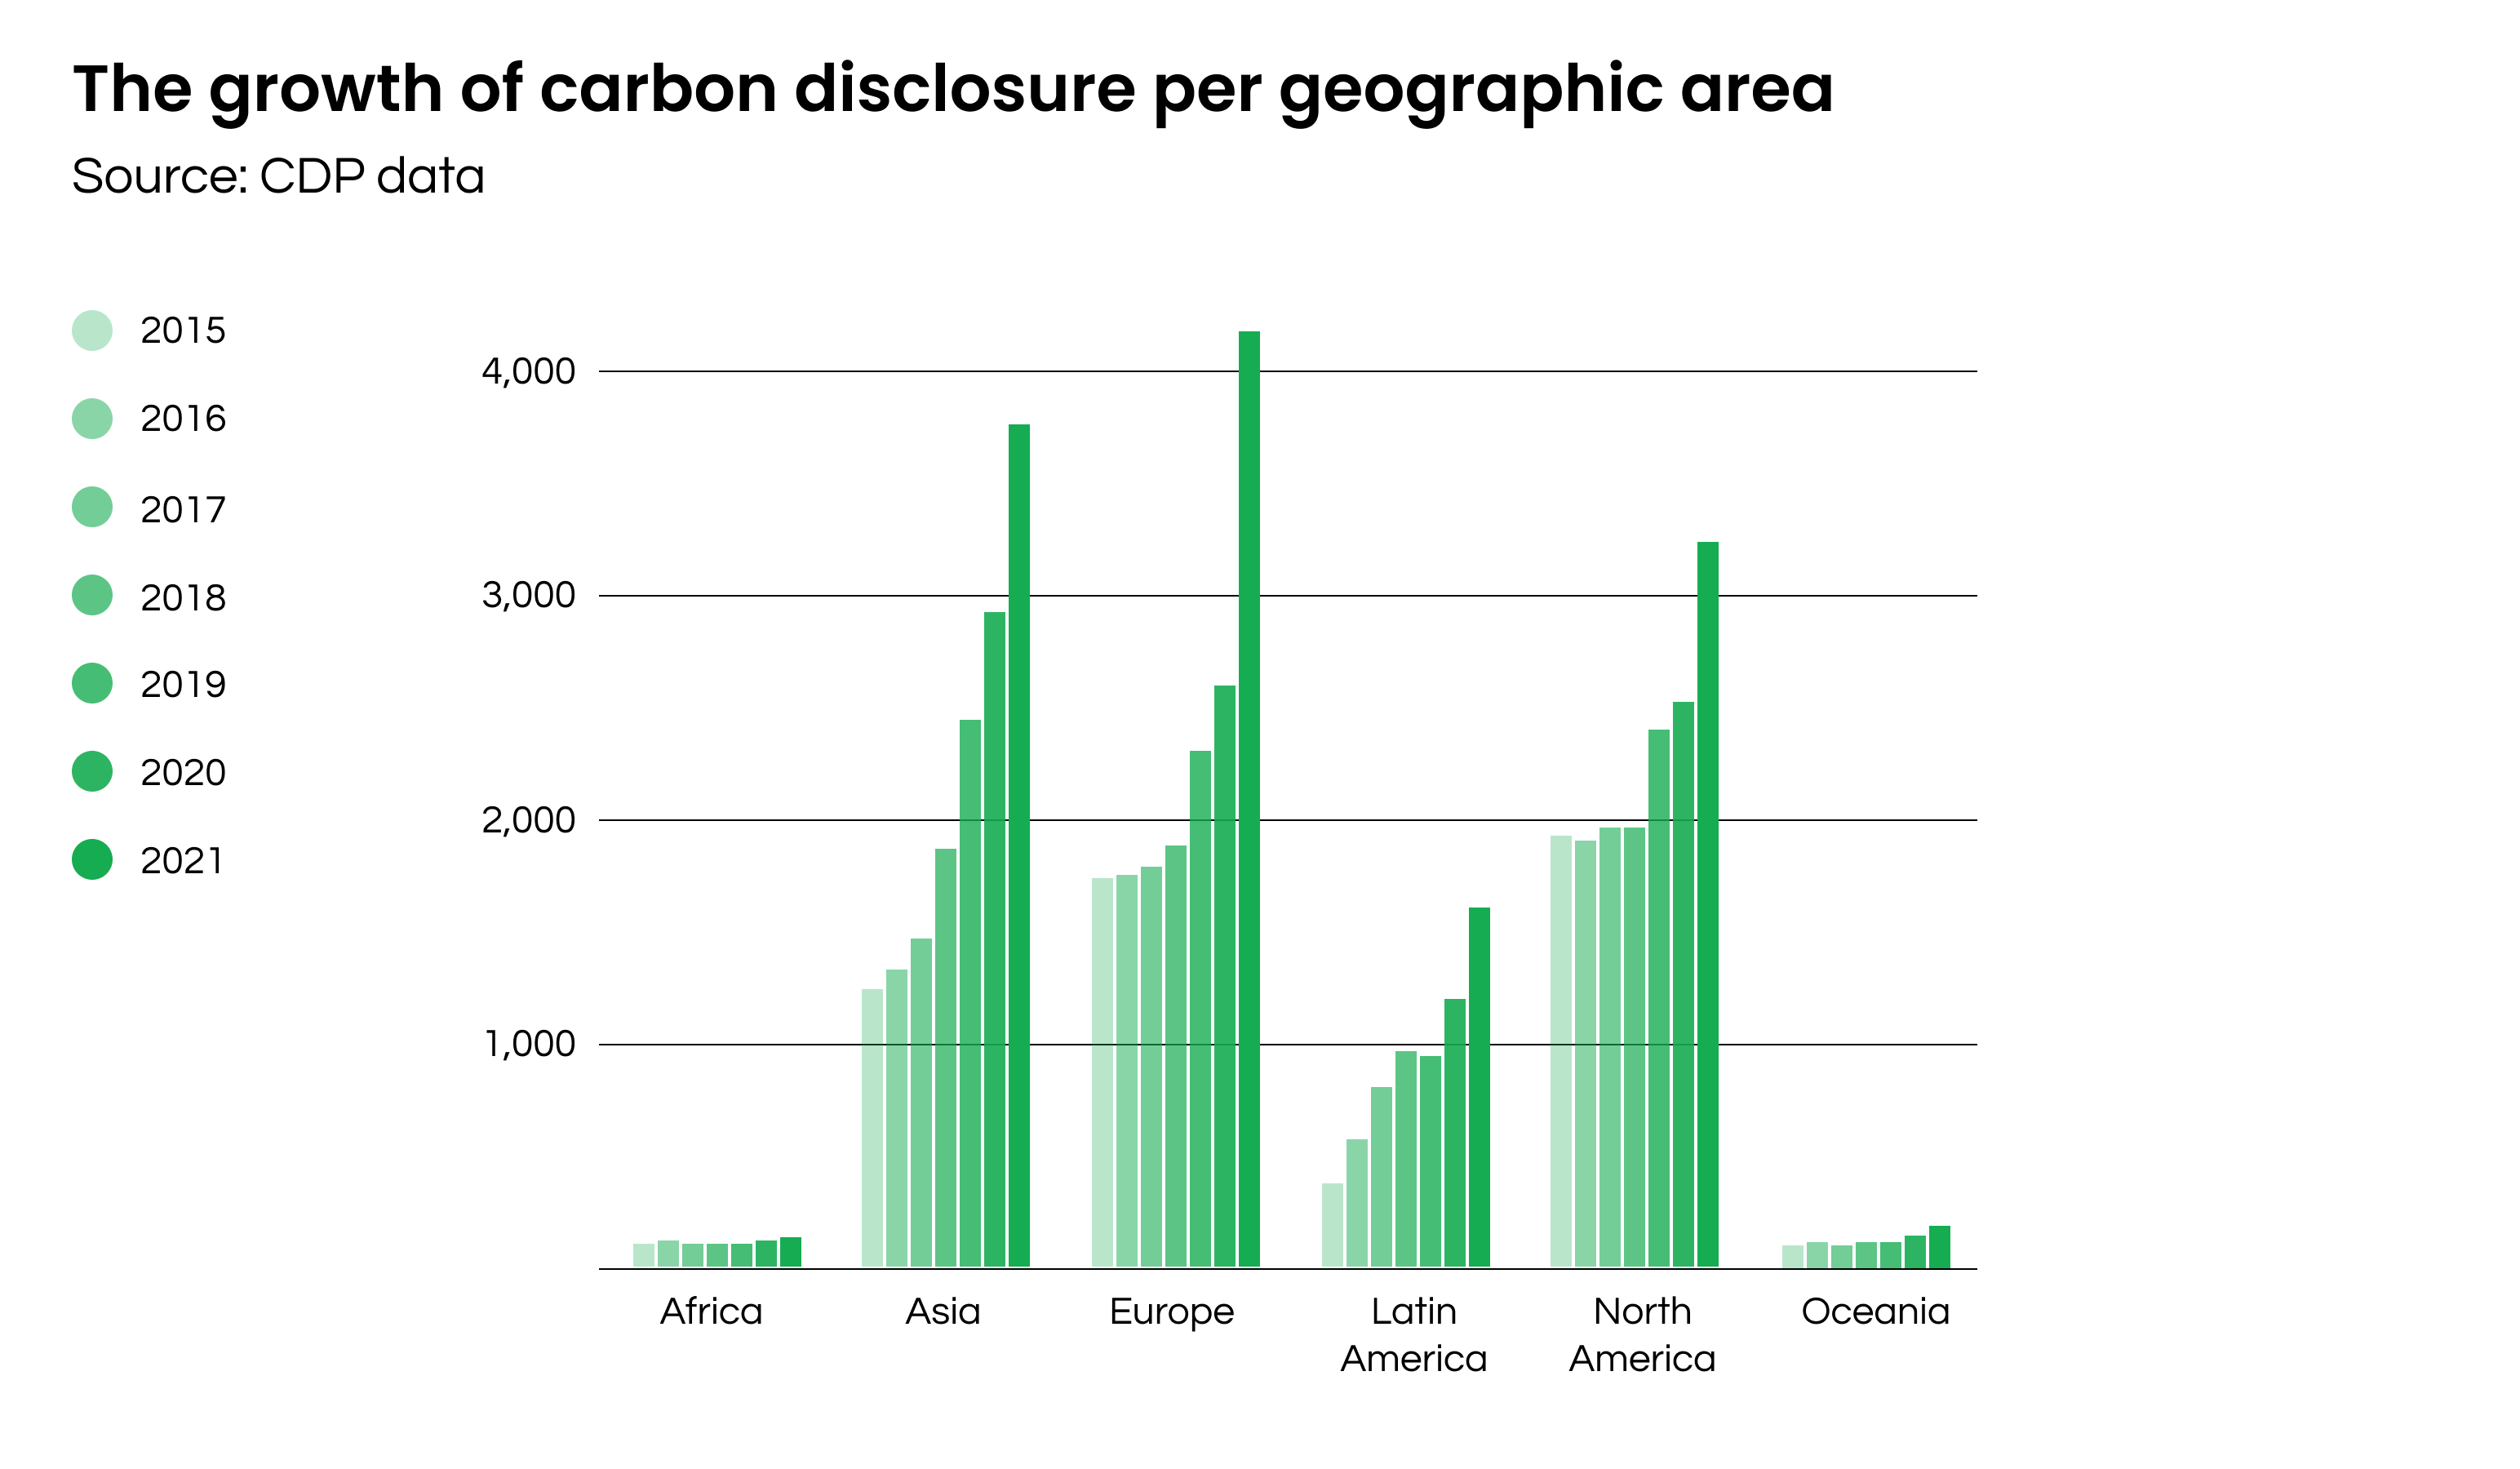 Figure 2. The growth of carbon disclosure per geographic area